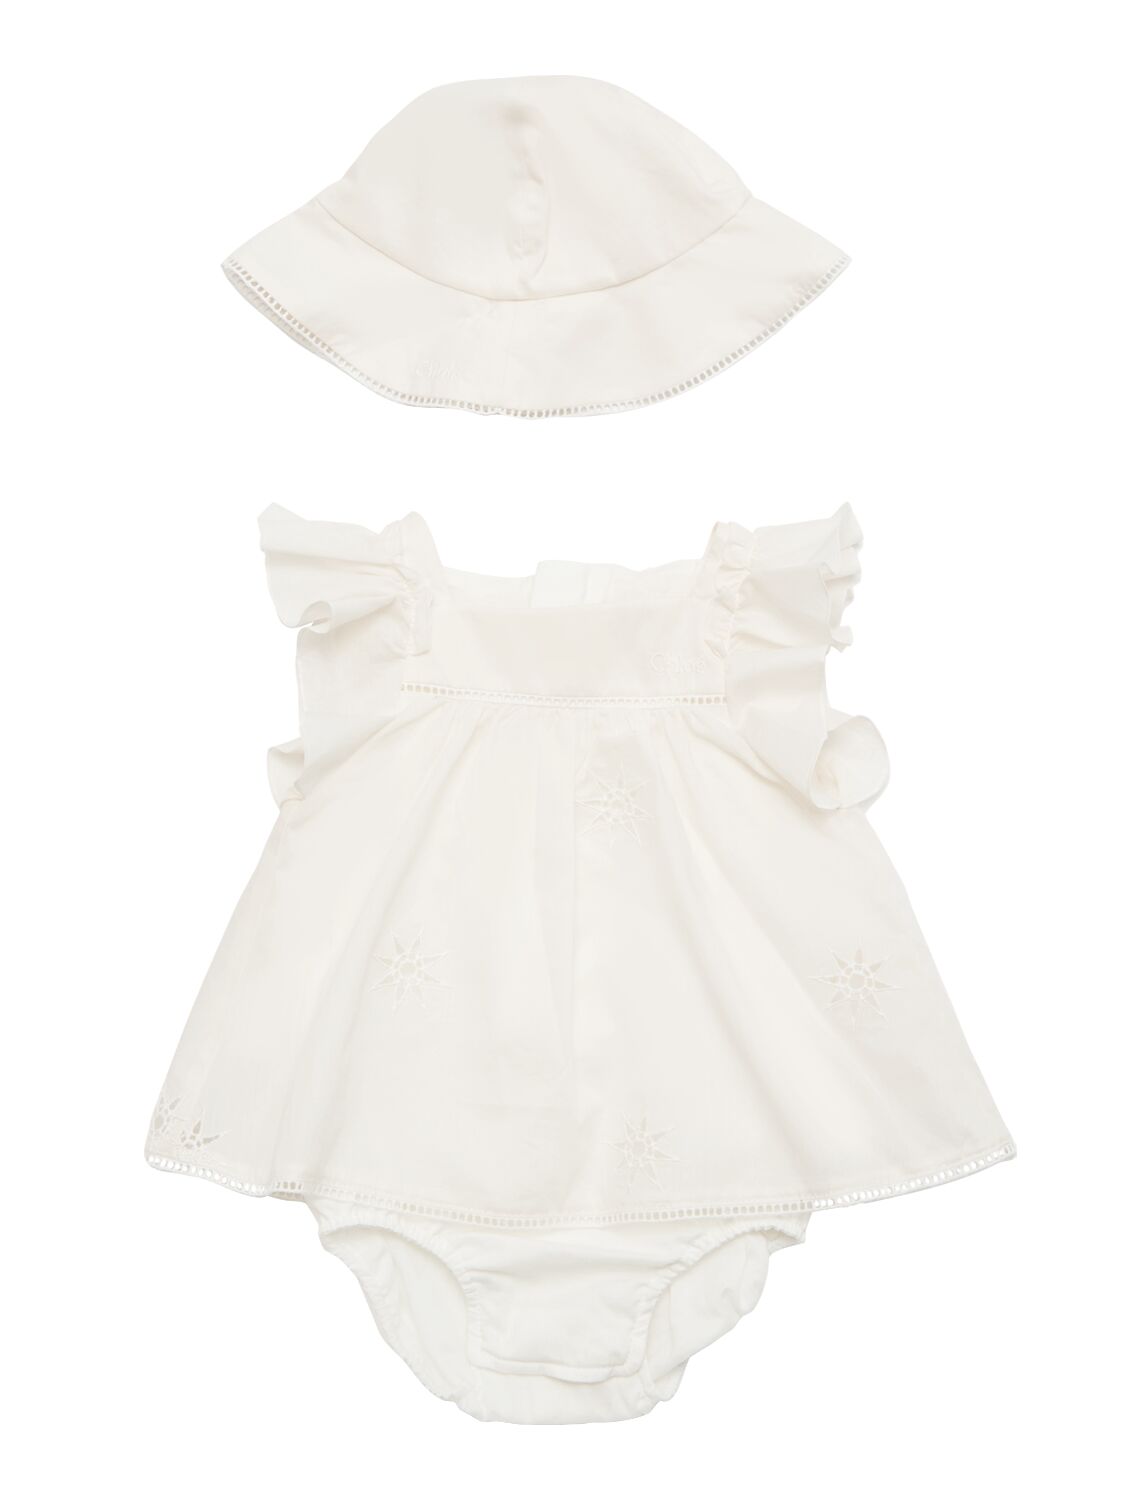 Image of Organic Percale Cotton Dress & Hat